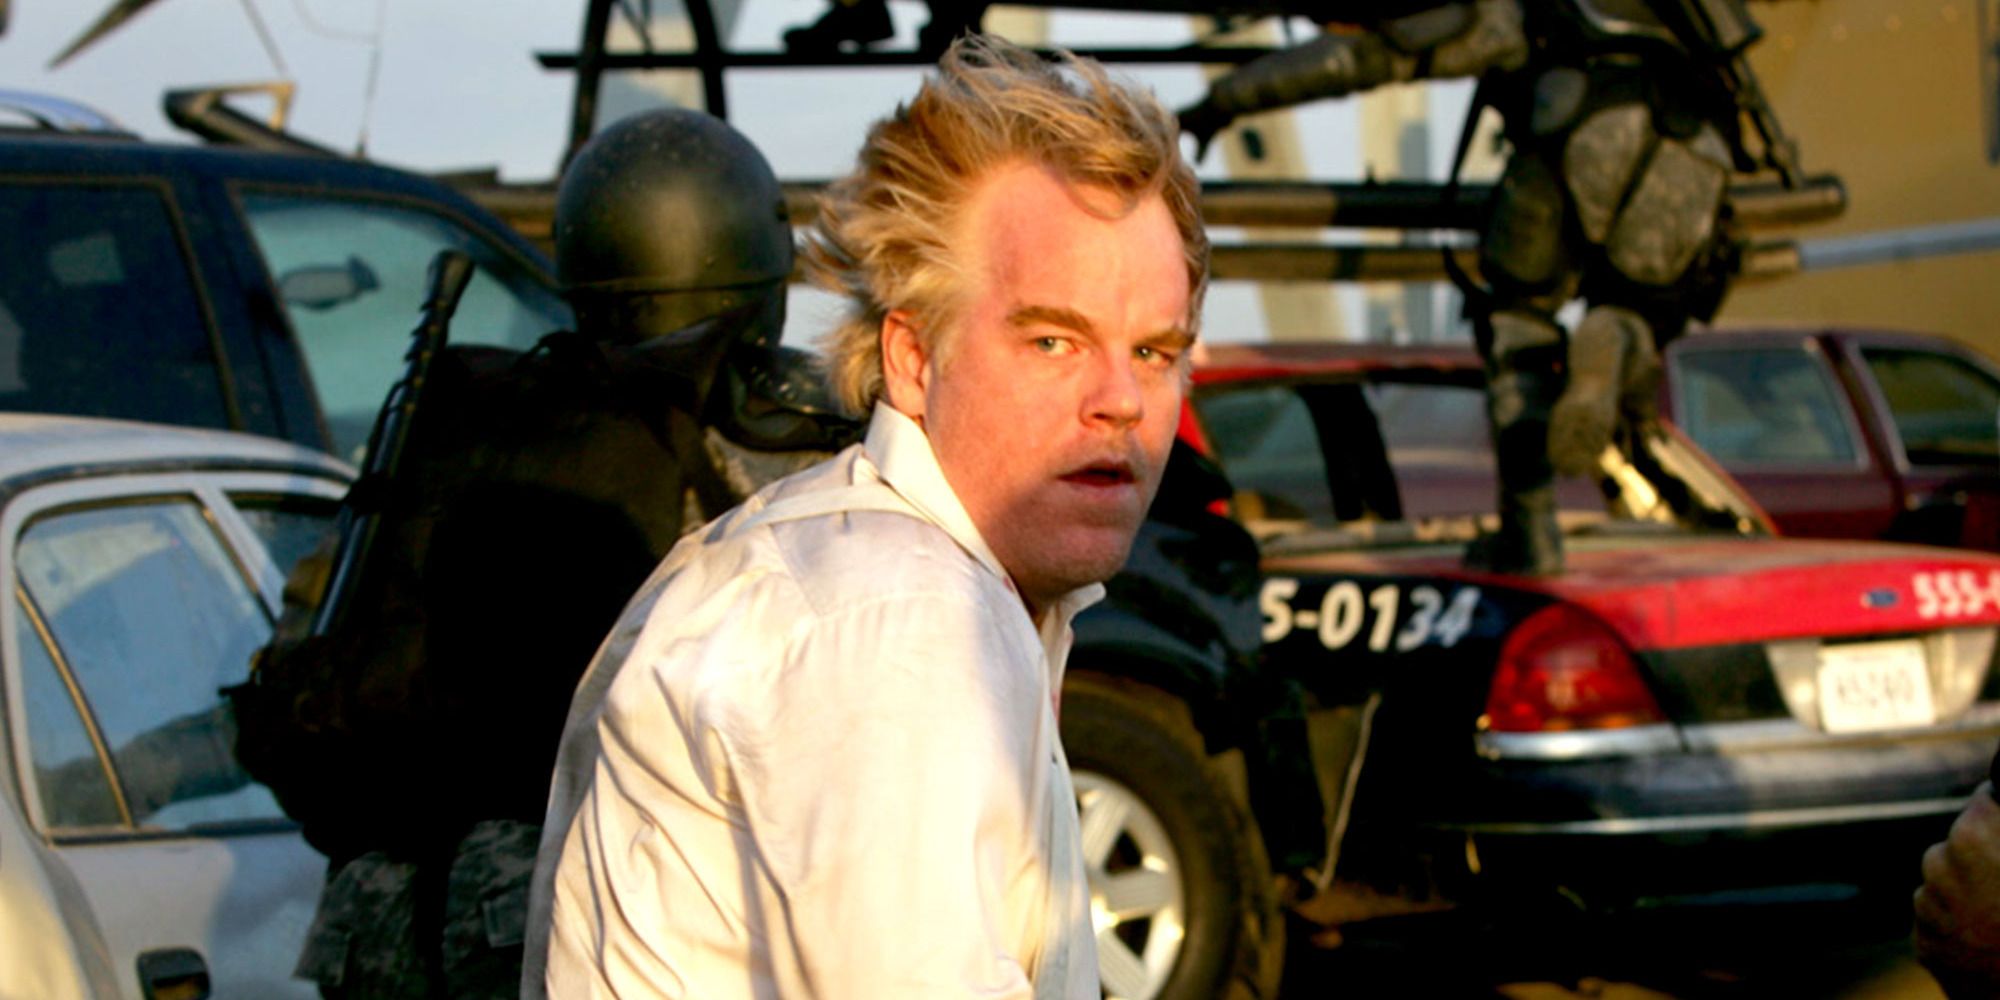 Philip Seymour Hoffman in 'Mission Impossible III', being escorted by troopers to a helicopter